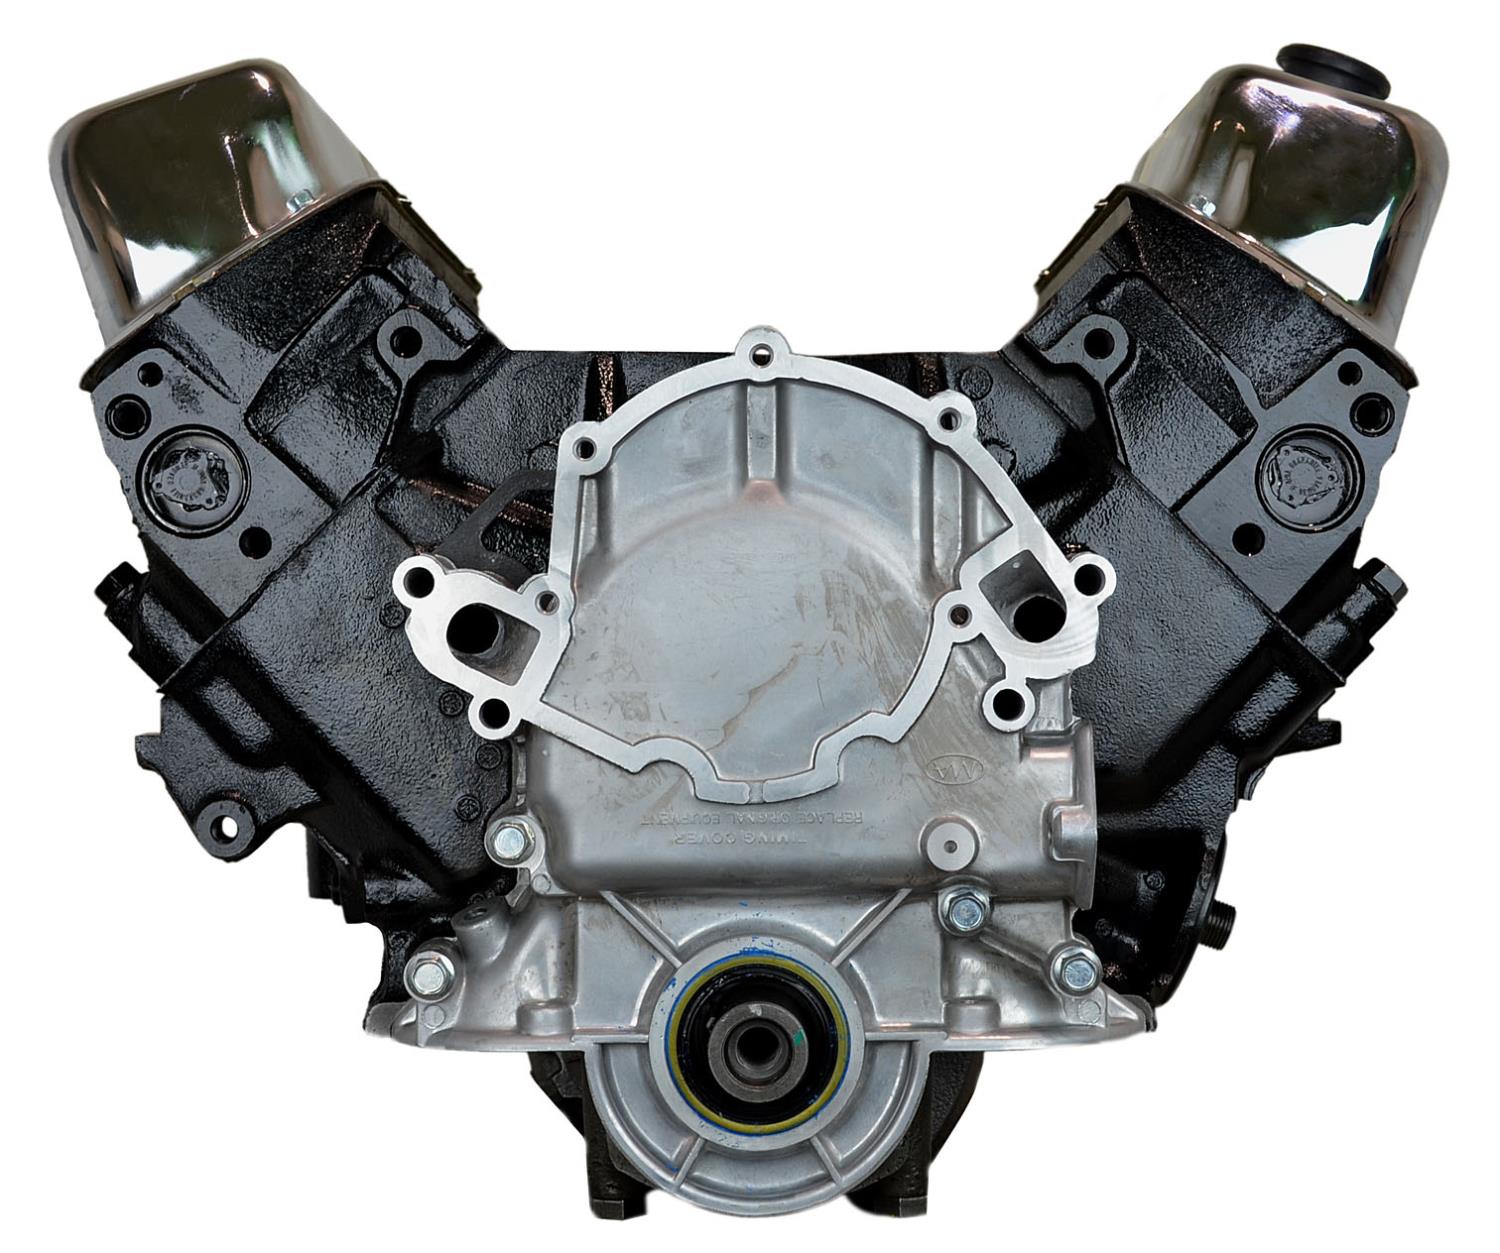 VF39 Remanufactured Crate Engine for 1975-1980 Ford/Lincoln/Mercury Car & F-Series Truck with 351W V8